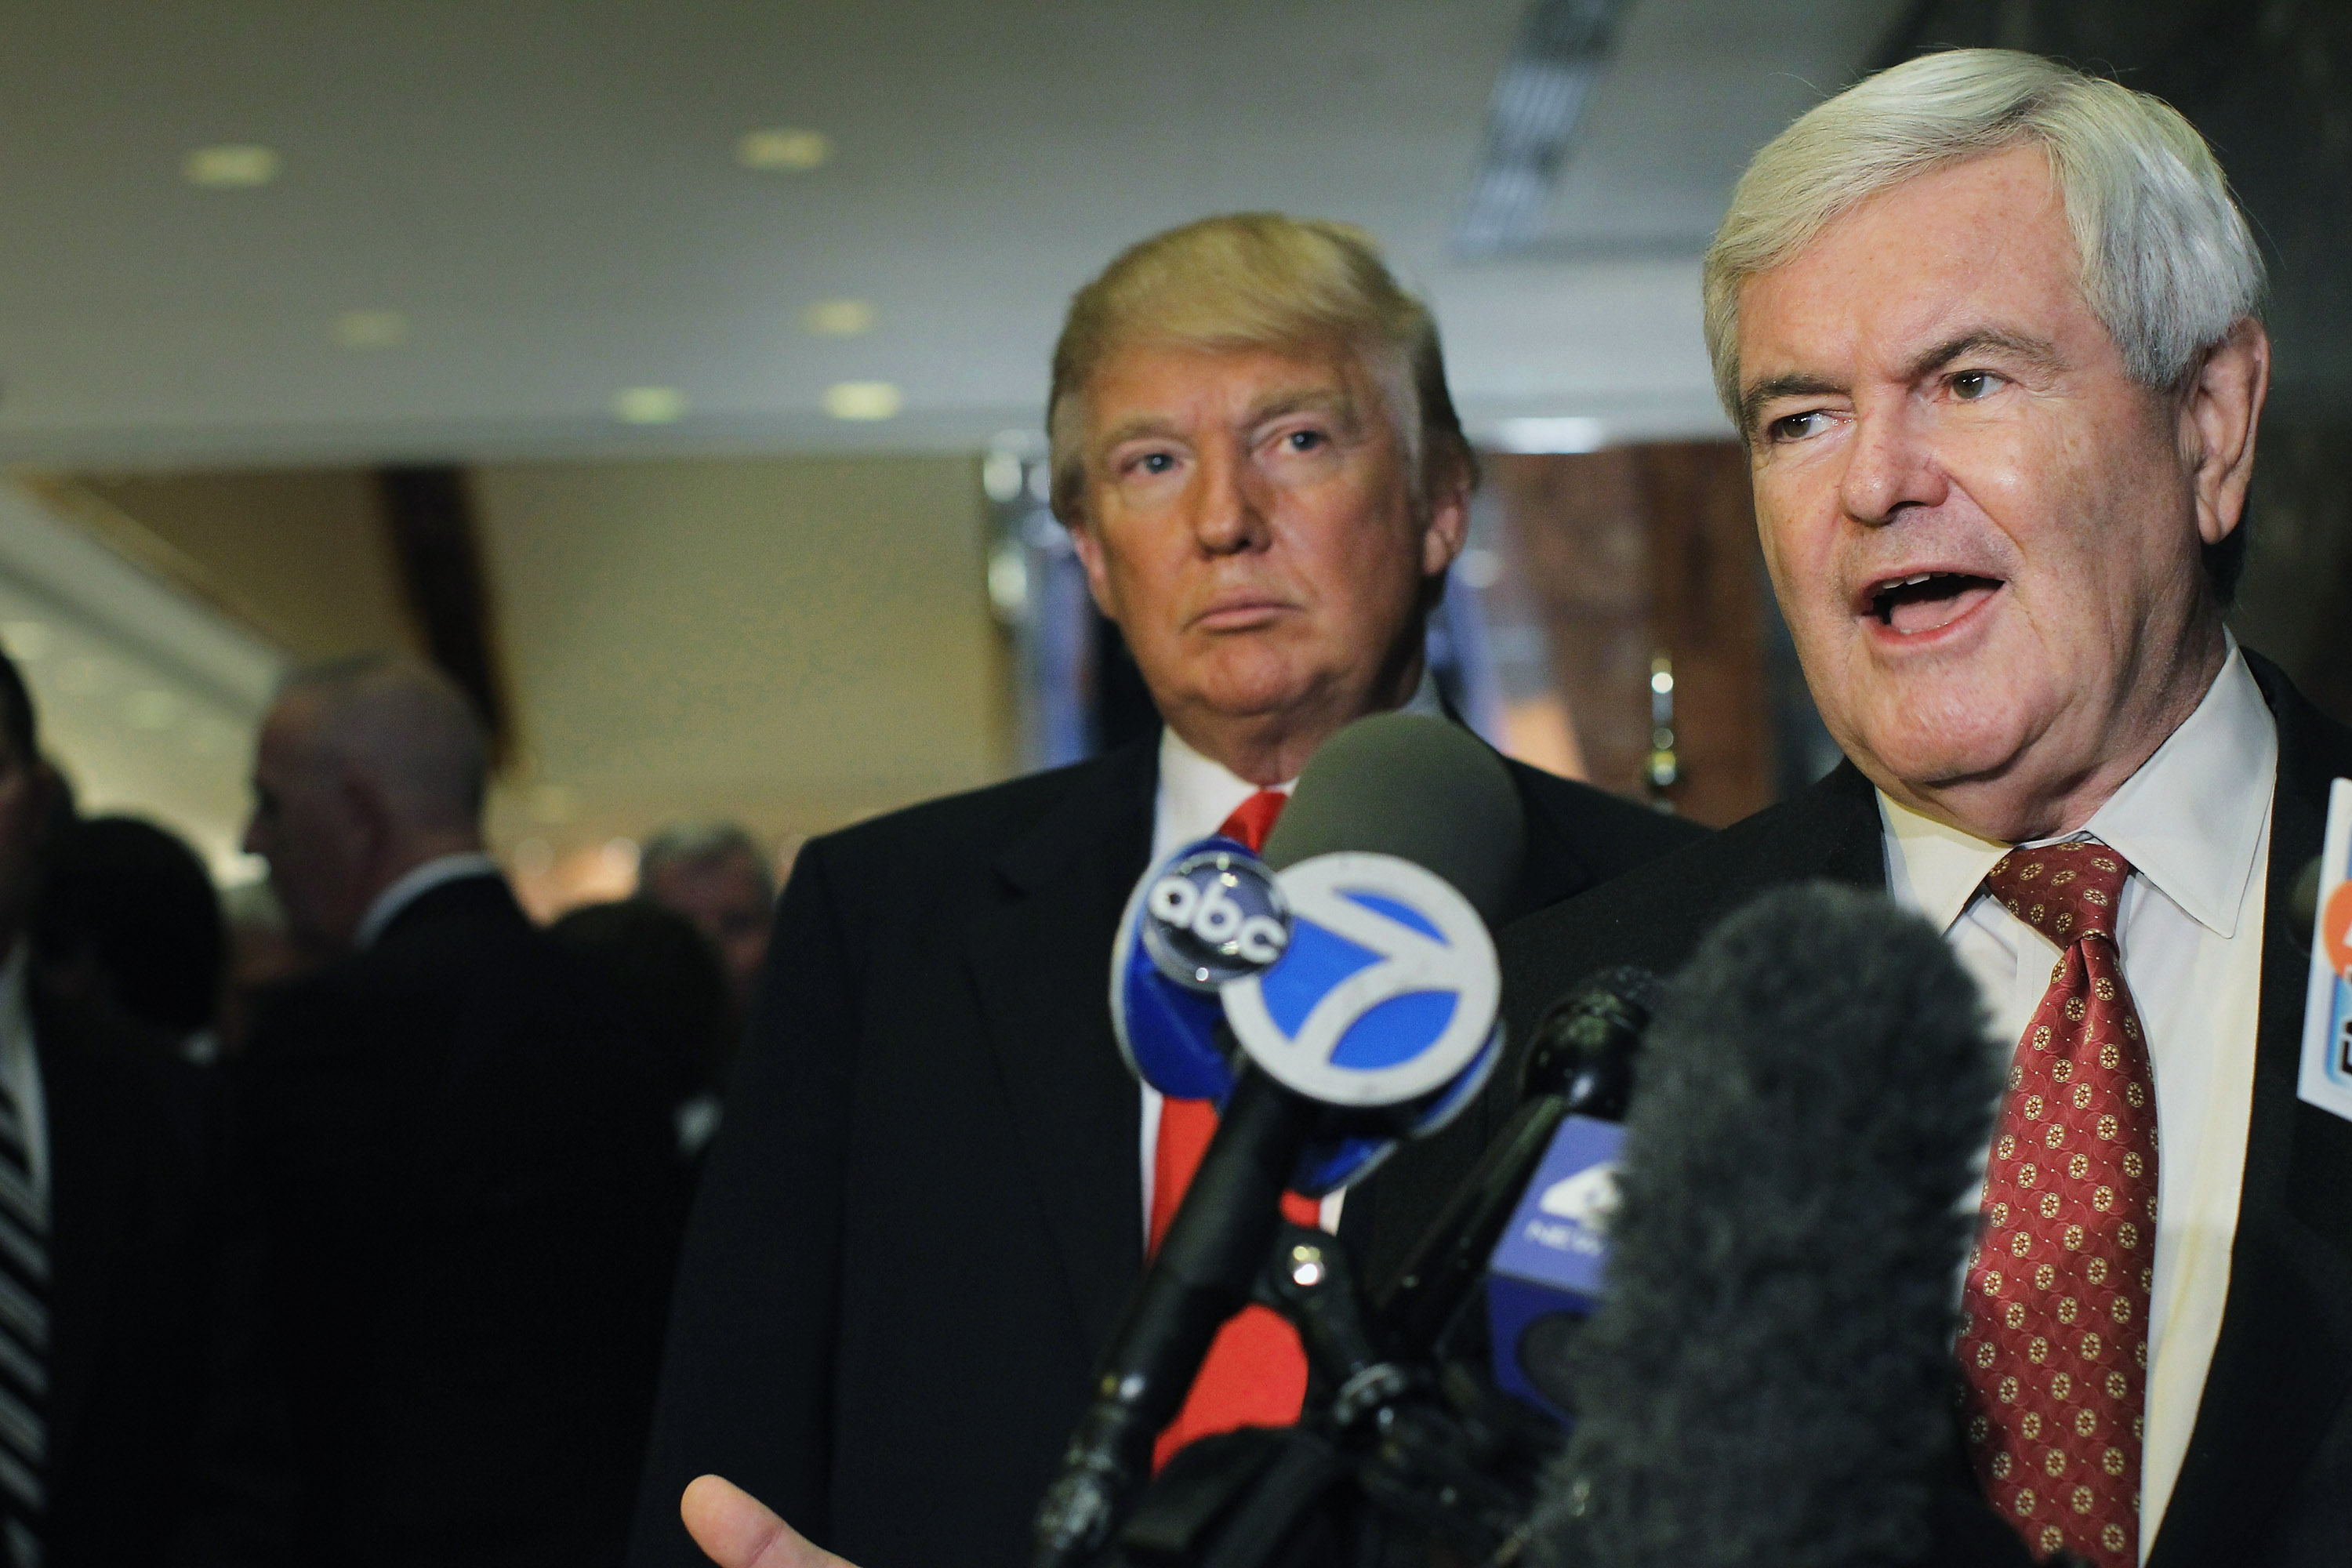 Then-Republican presidential nominee hopeful Newt Gingrich speaking to the media after a meeting with Donald Trump on December 5, 2011 in New York City. (Spencer Platt—Getty Images)